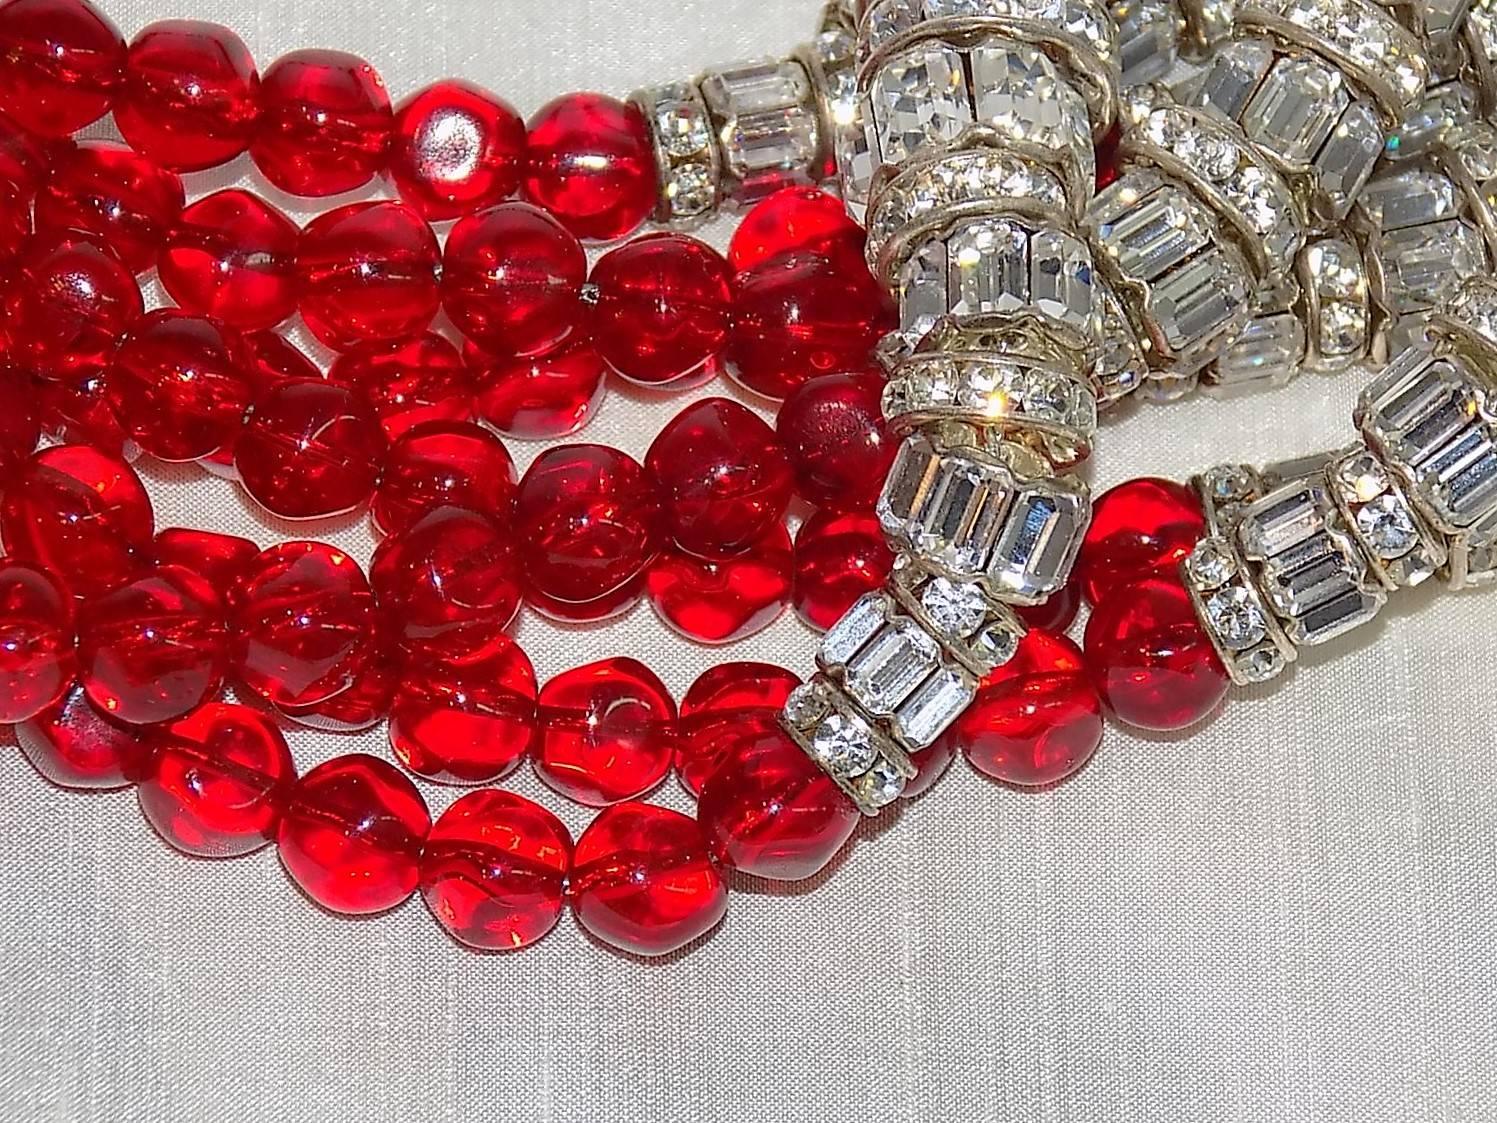 Vintage Anne Klein Couture divine massive 7 rows ruby red glass beads Necklace 1